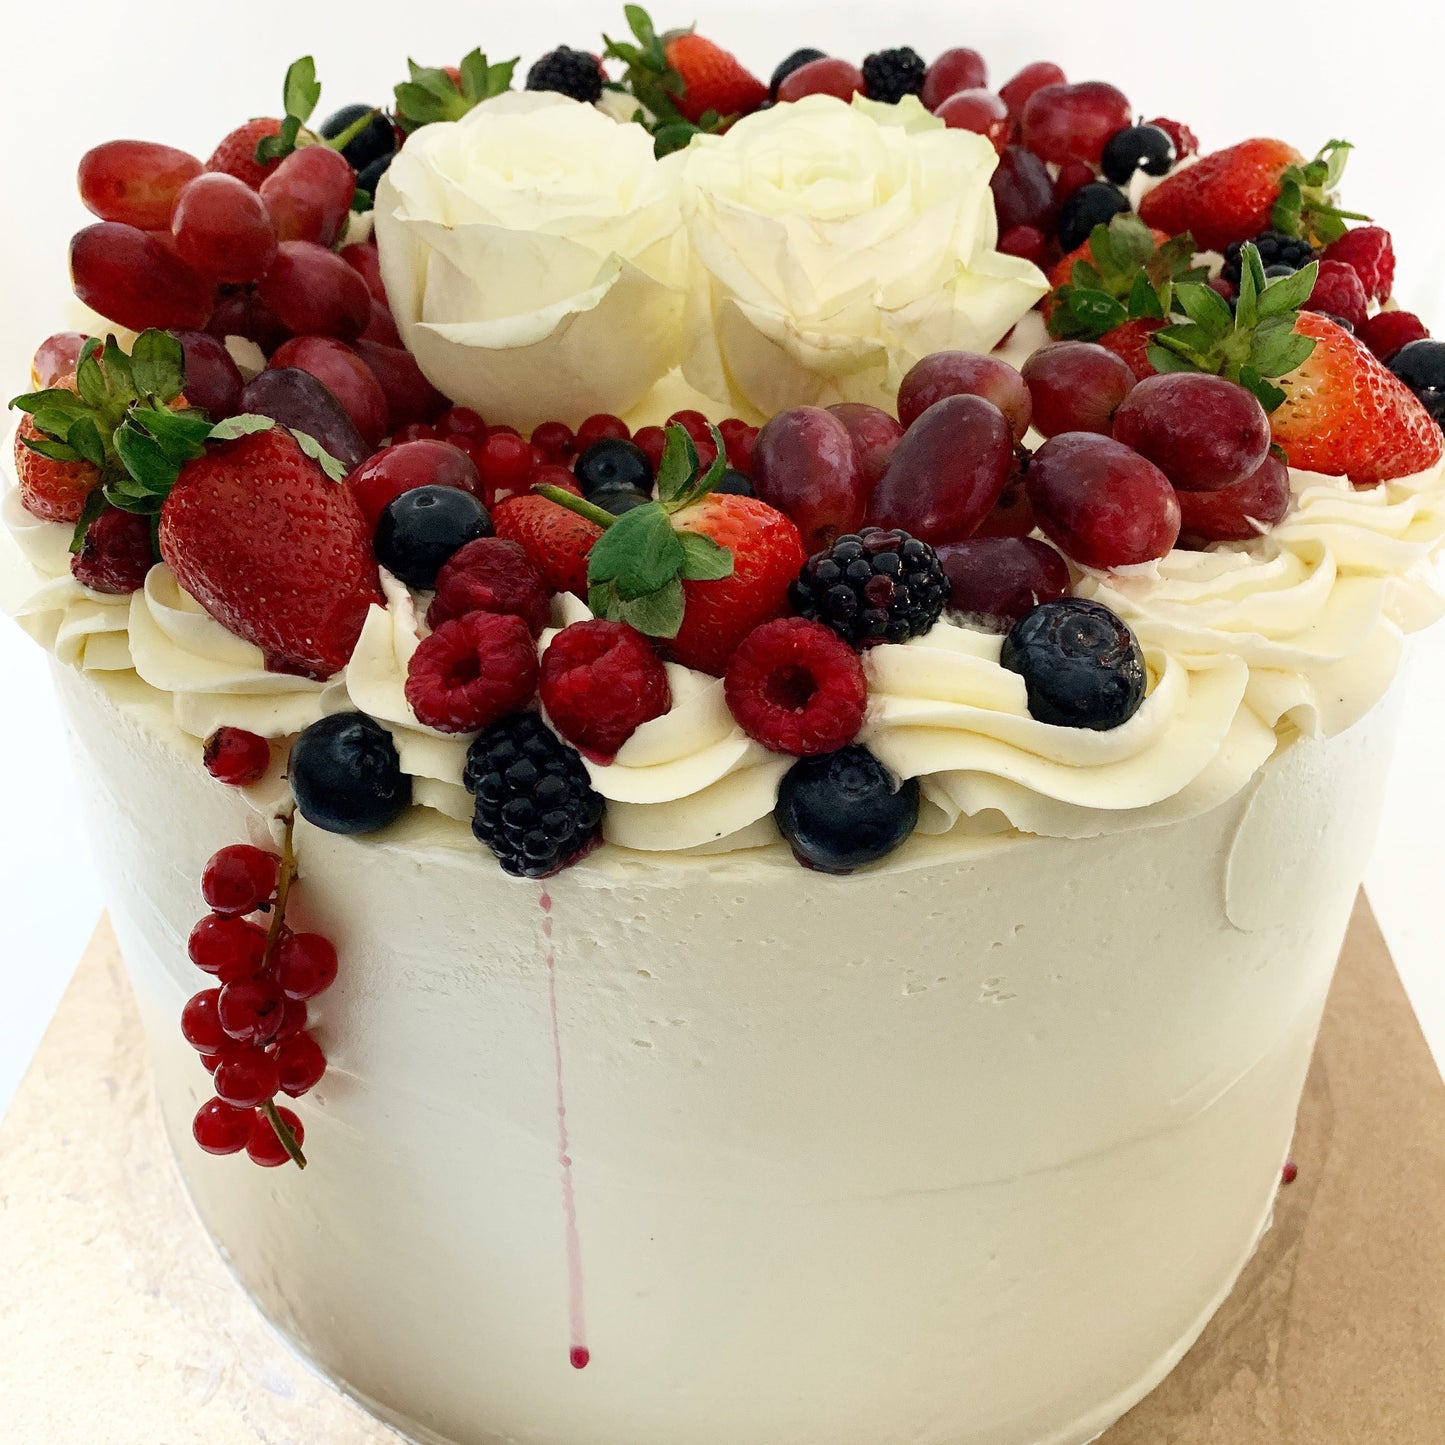 “How do you want it?”: Build Your Own Premium Layer Cake